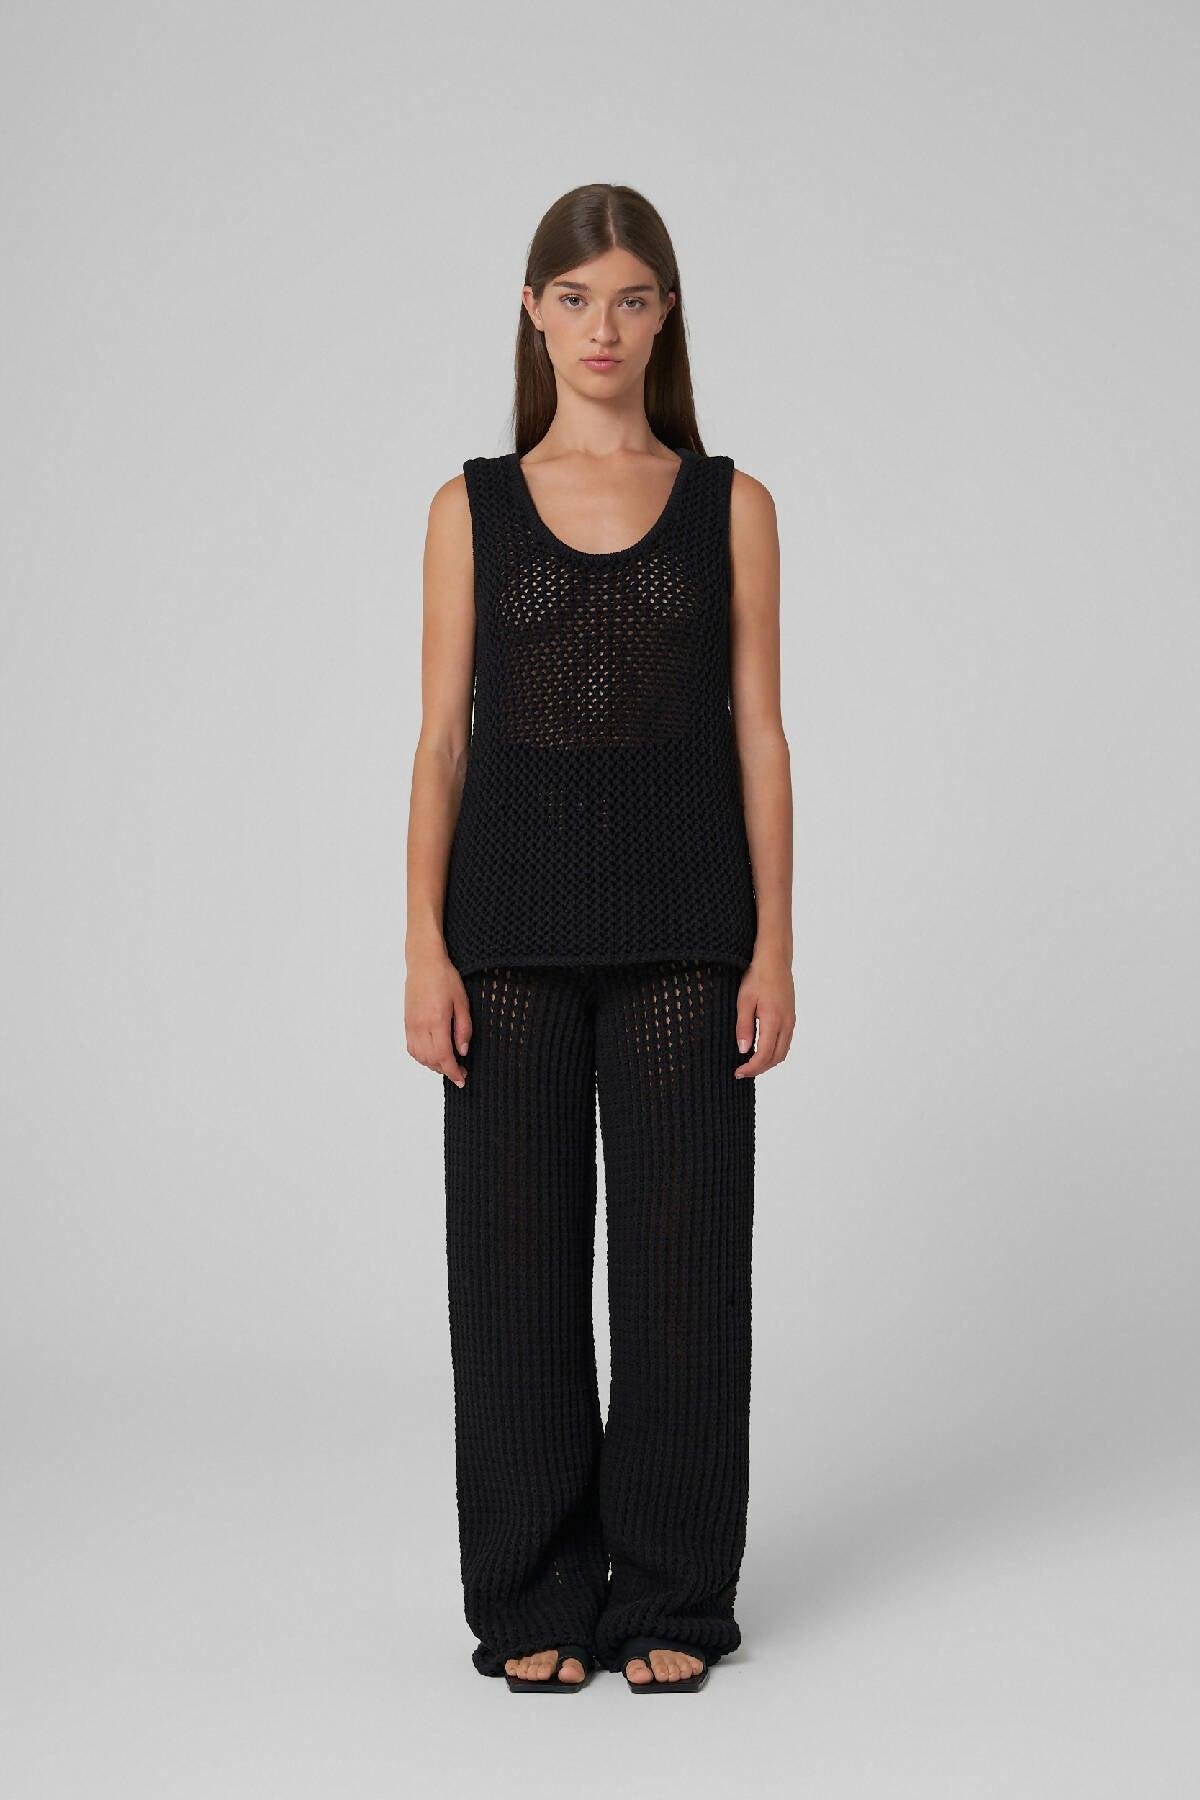 MARYAM open knit pants by LEAP CONCEPT